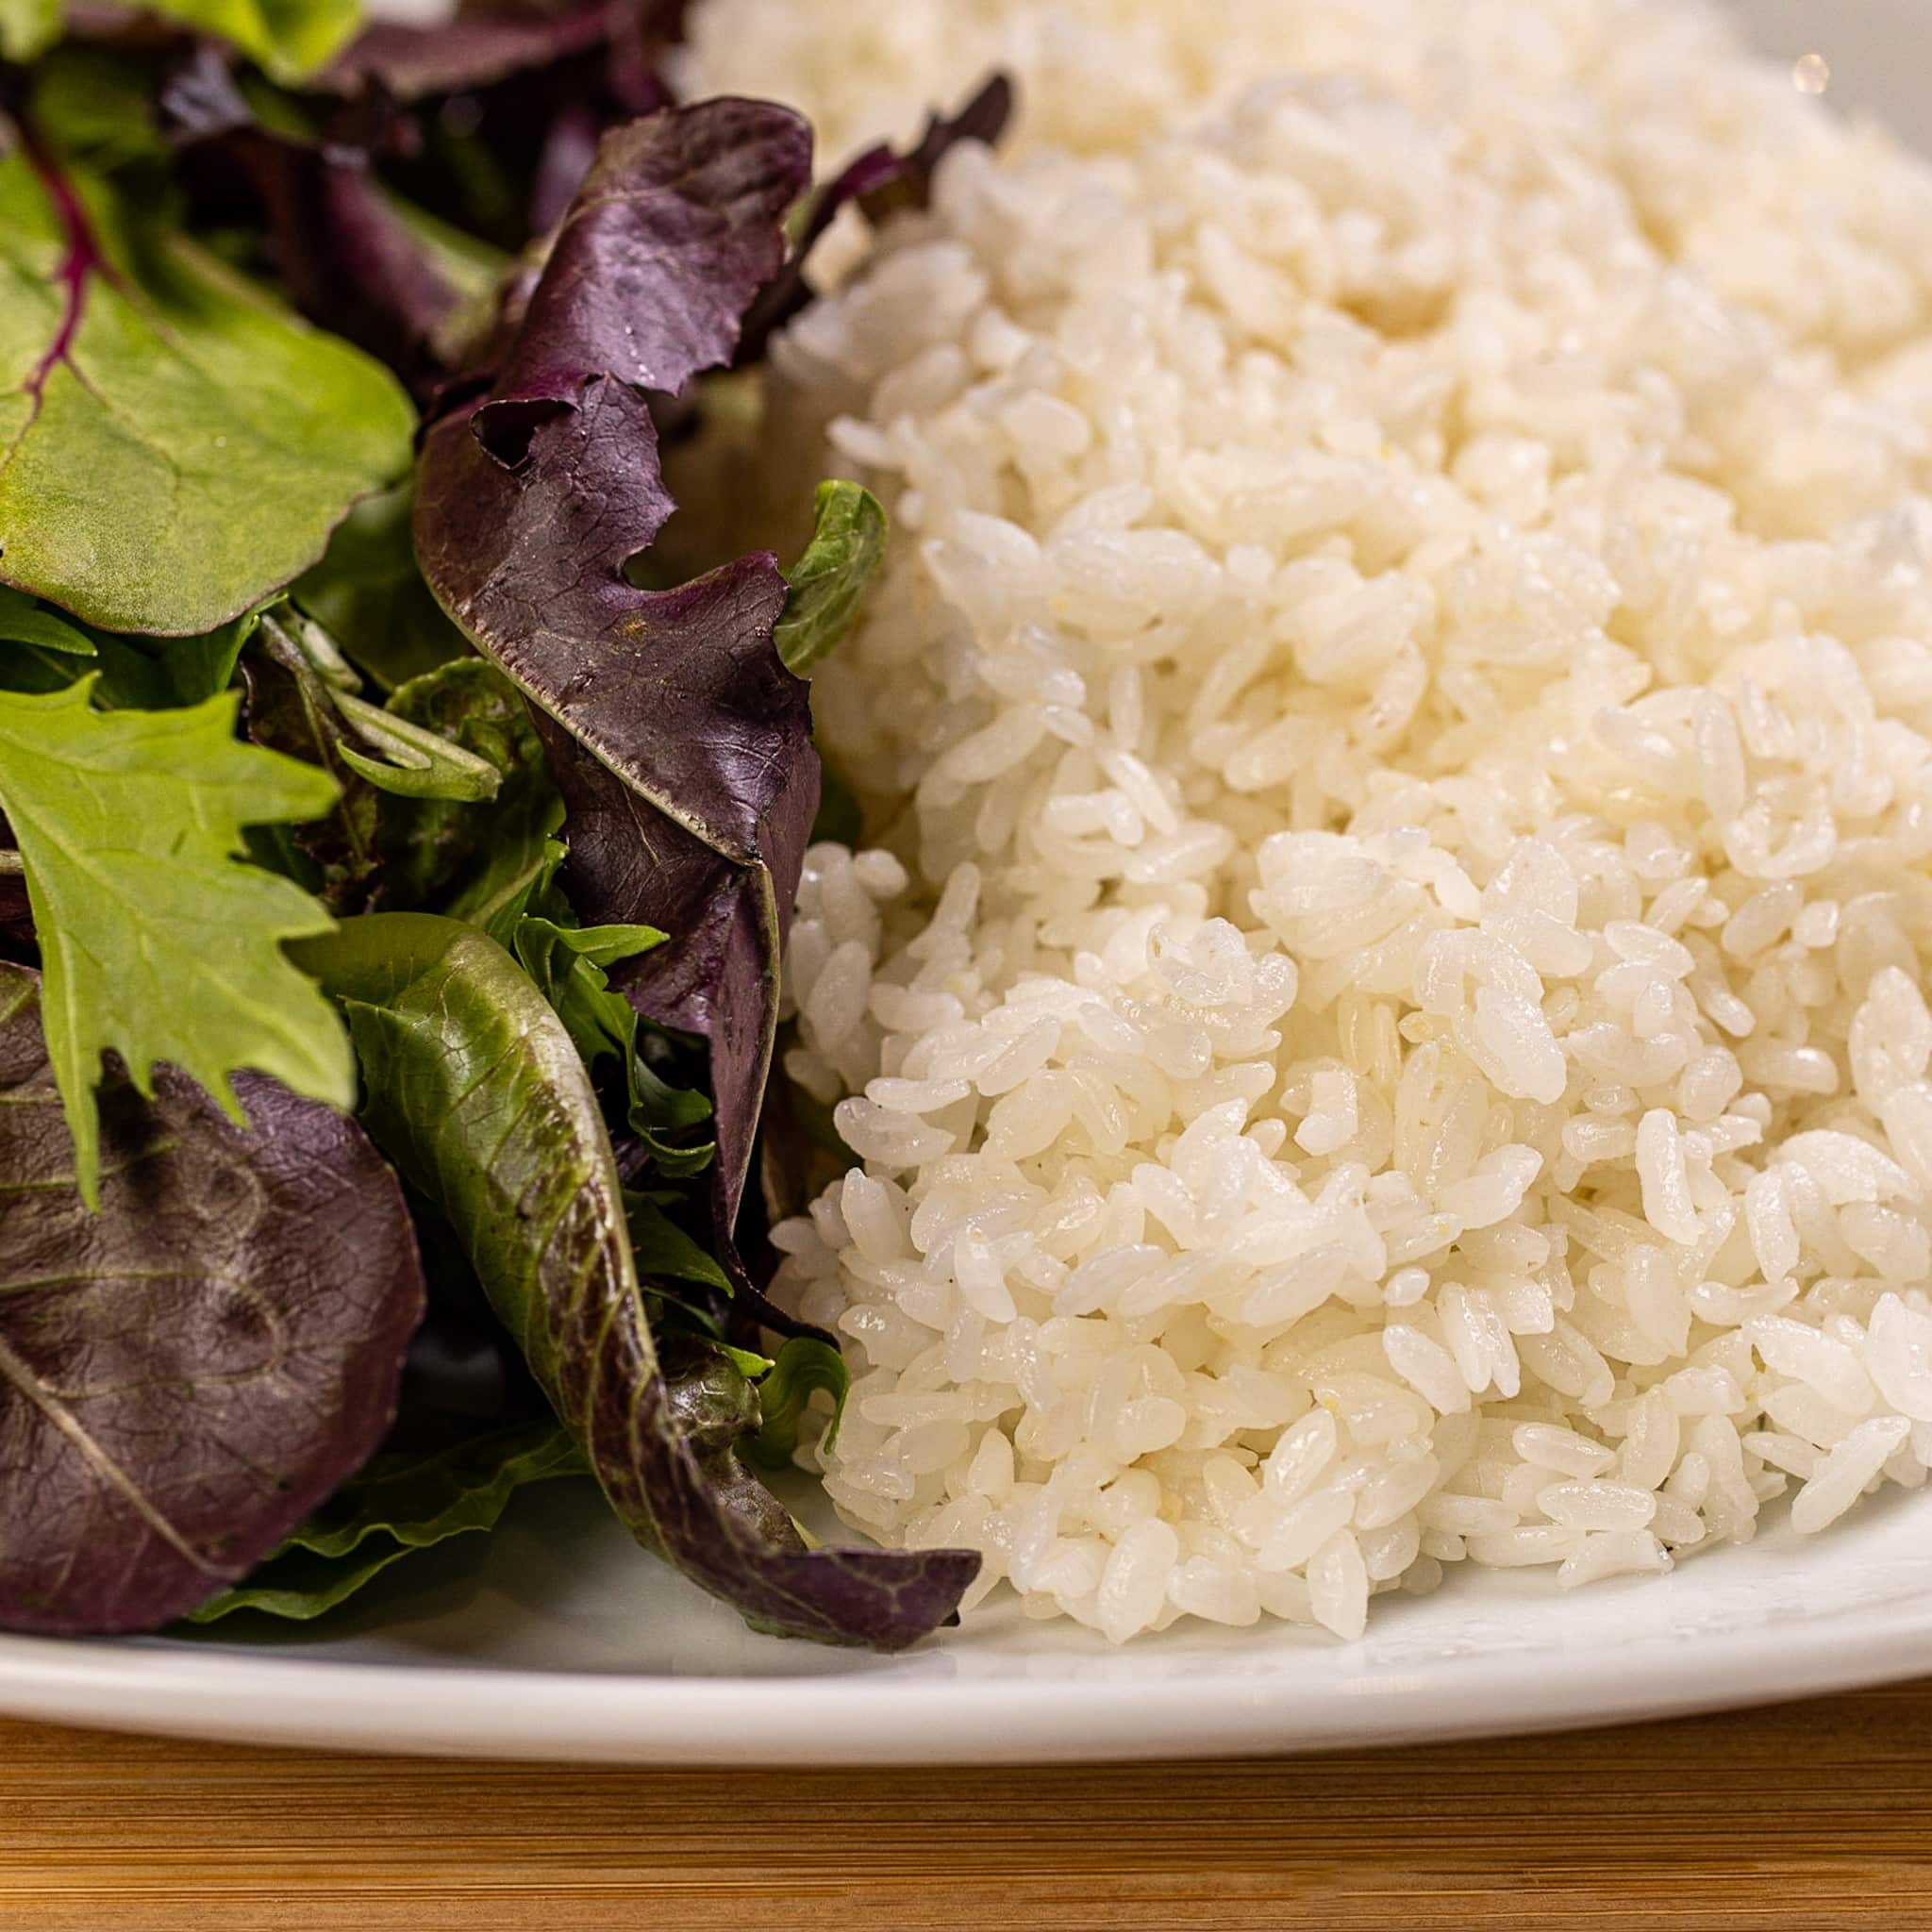 A plate of rice and a salad on a wooden table.